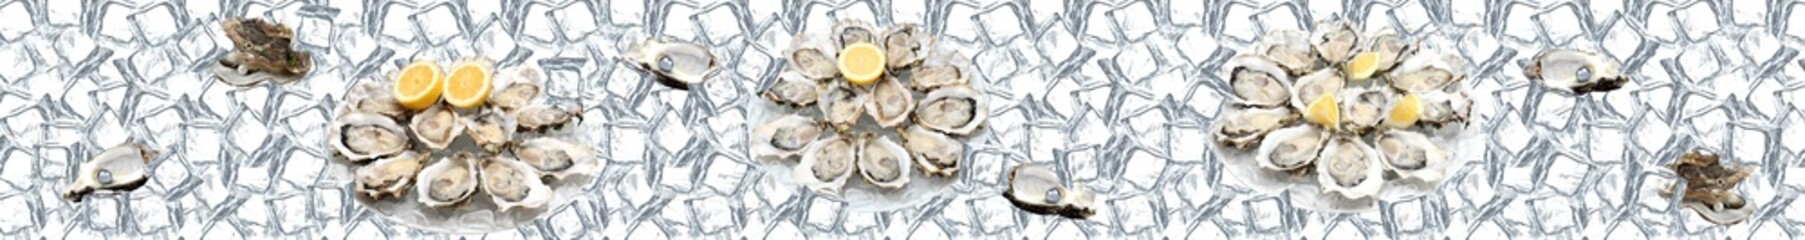 Oysters on ice cubes